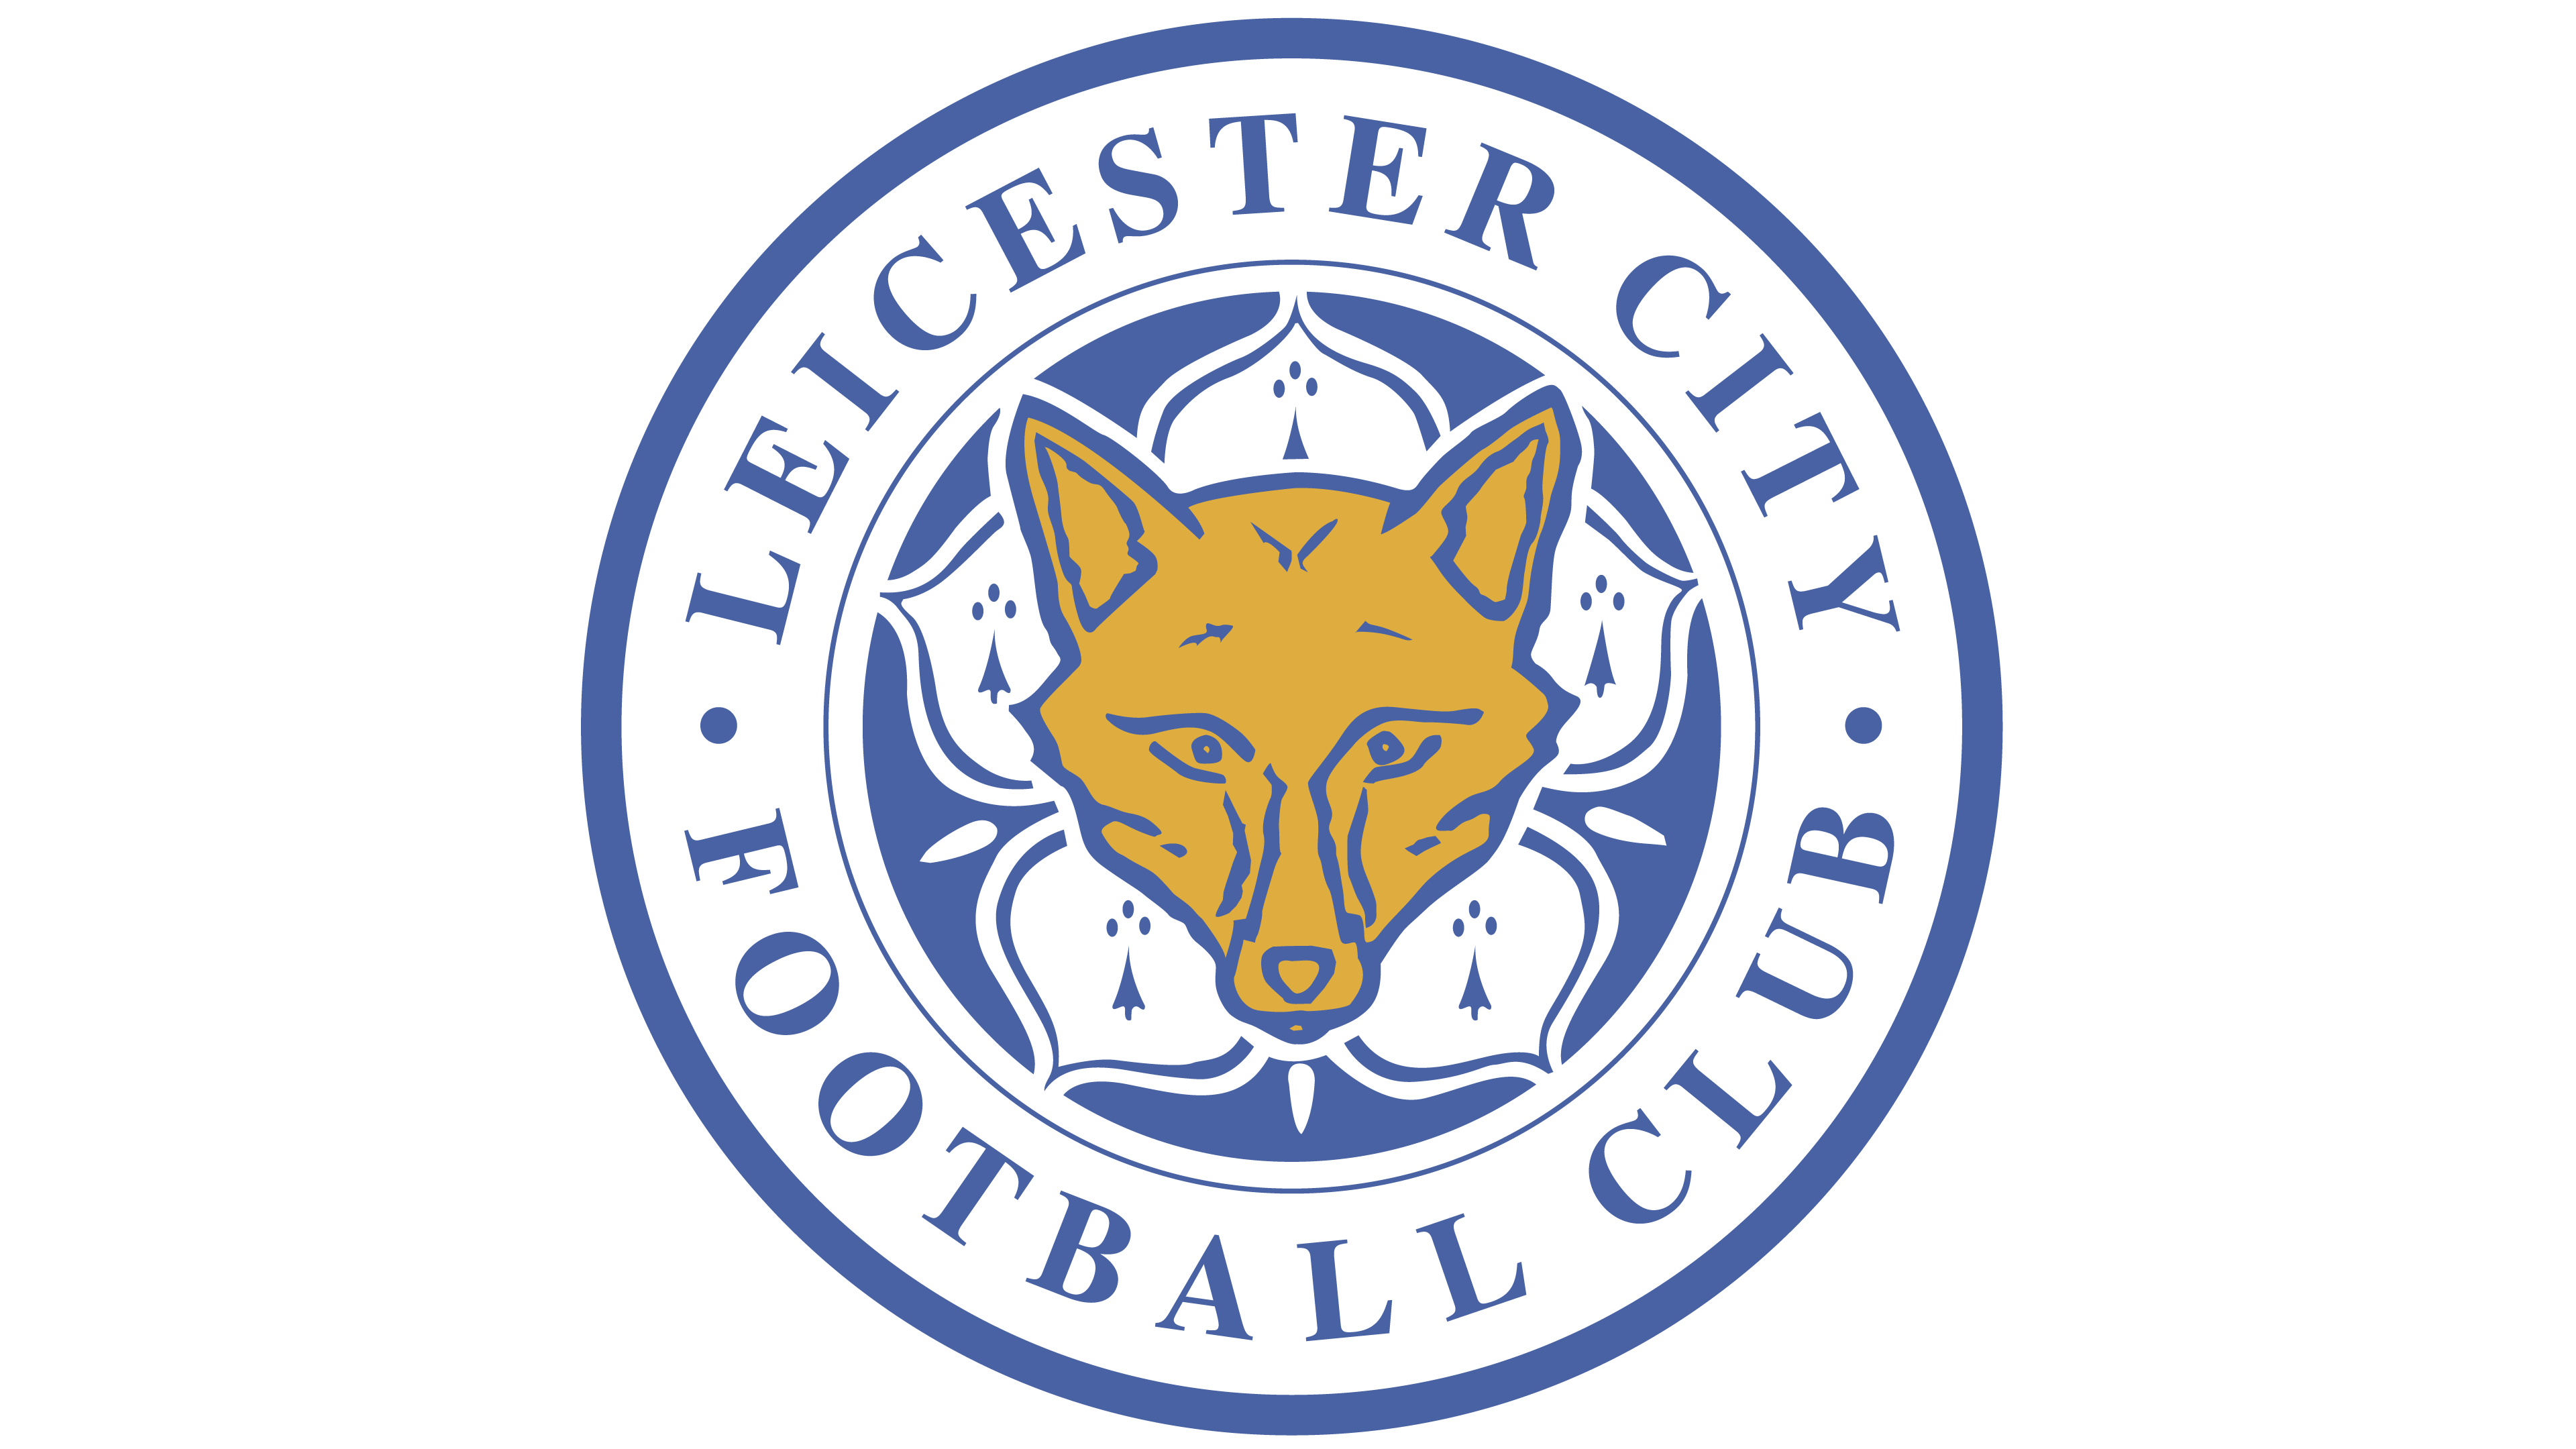 Football Club Logo - Leicester City Logo - Interesting History of the Team Name and emblem